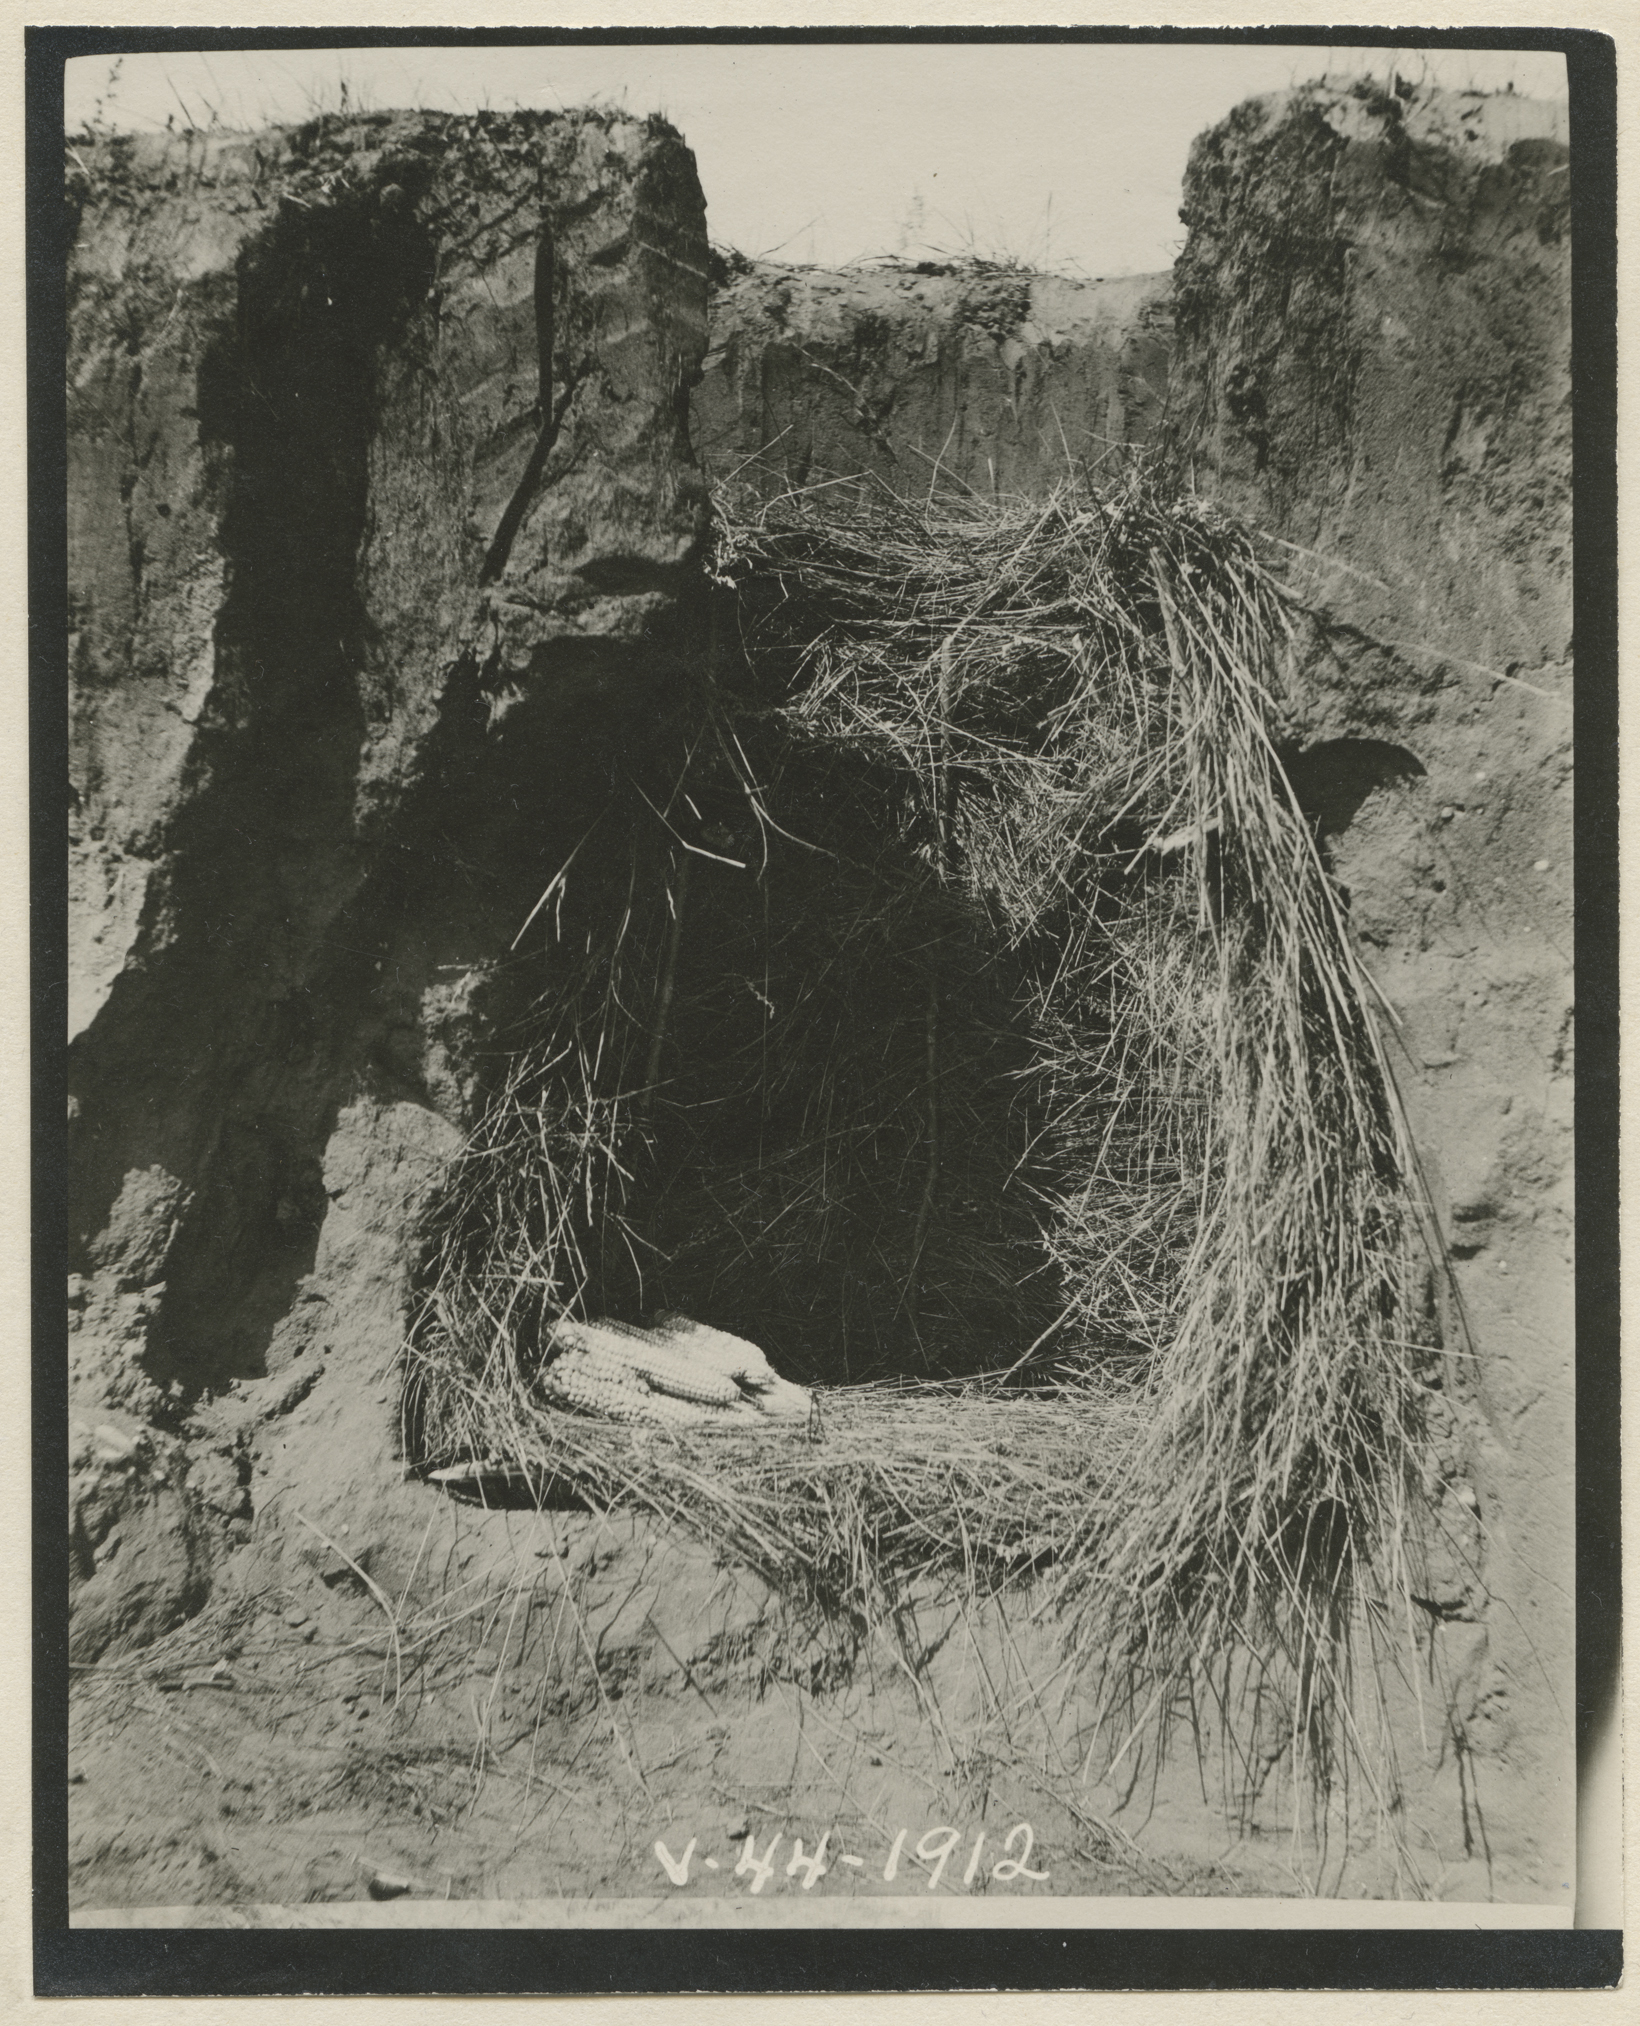 The model of cache pit shown in vertical section, made by Buffalo Bird Woman in a bank on the Missouri River.